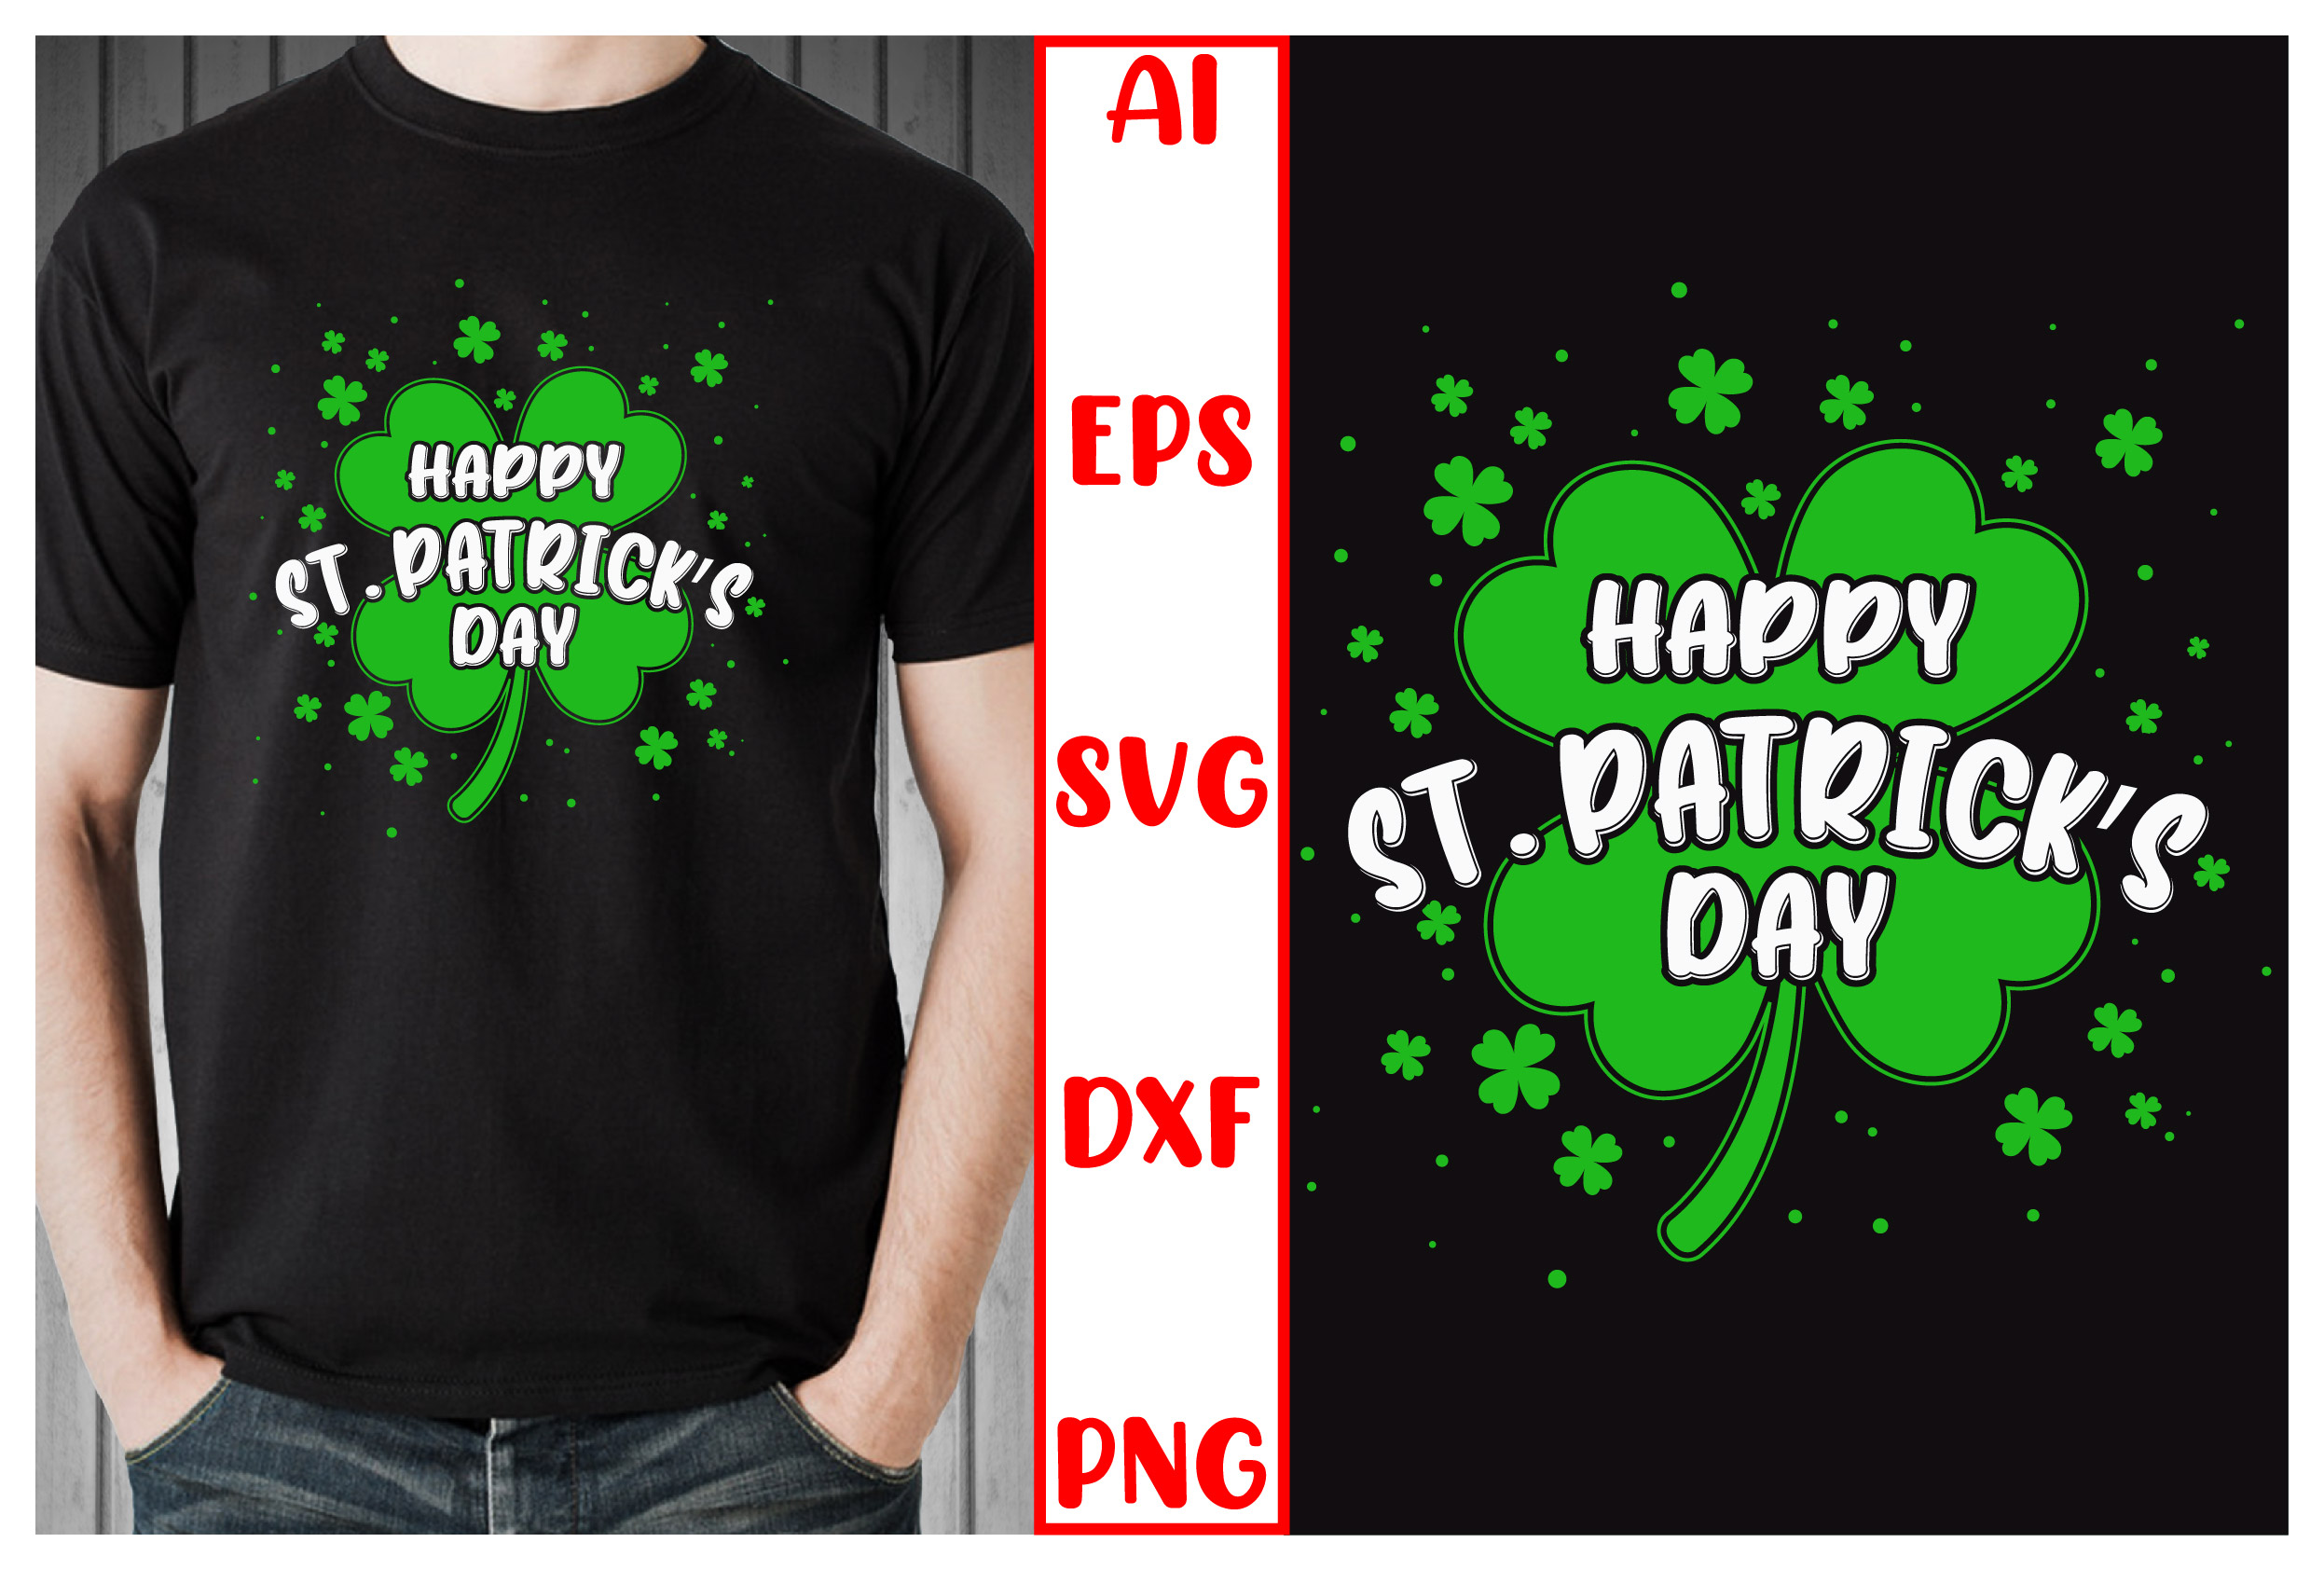 St patrick's day t - shirt with a shamrock.